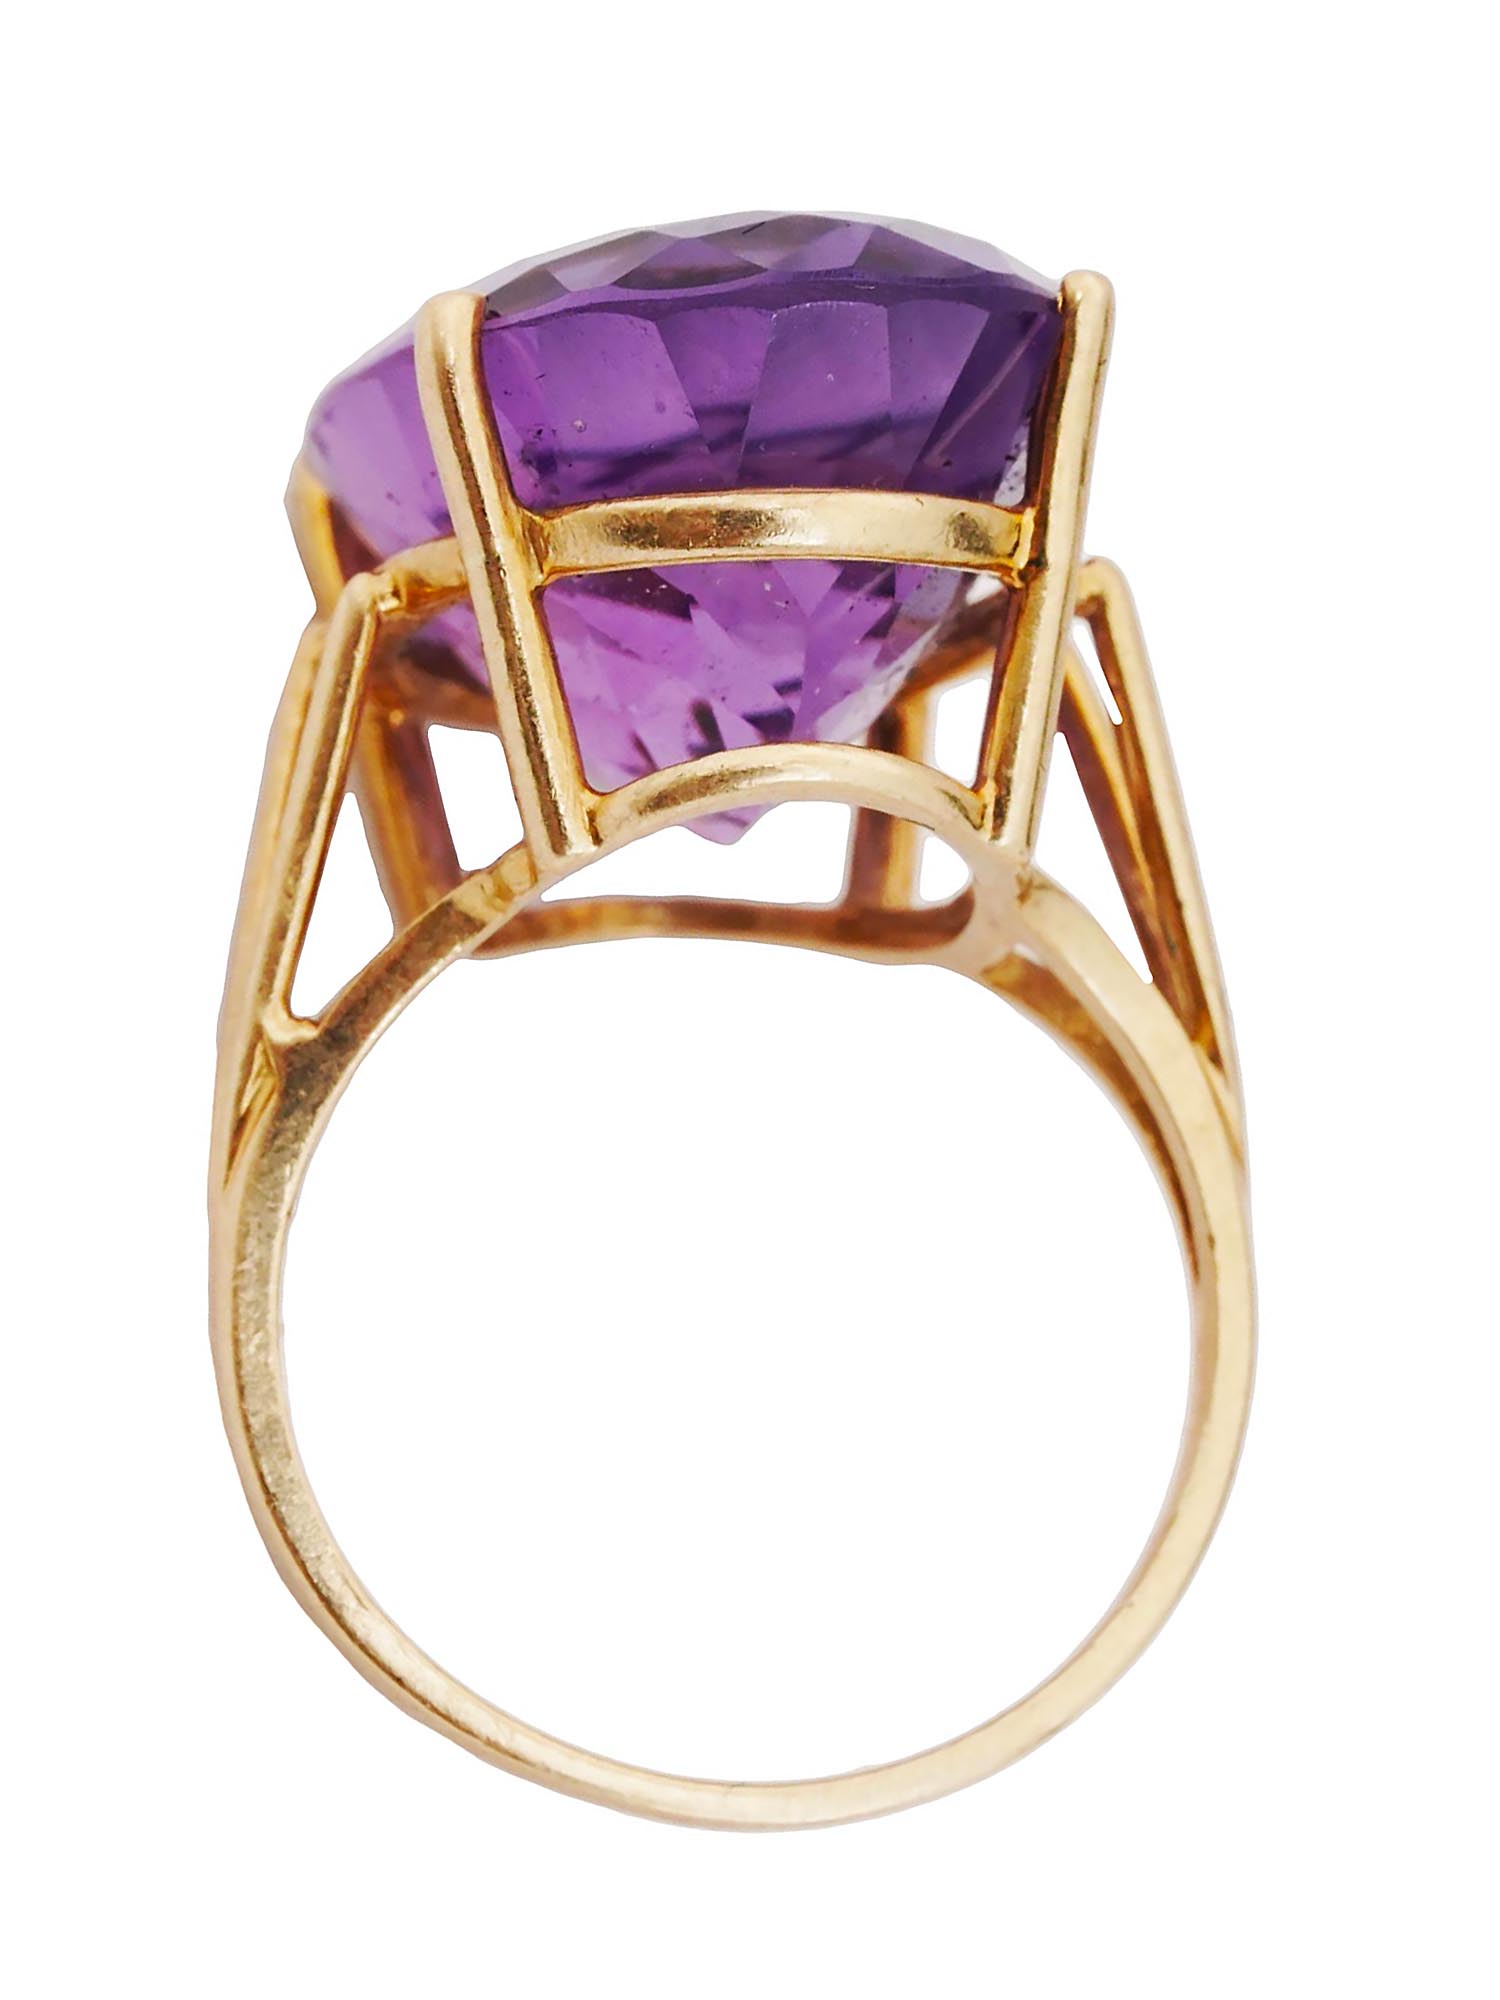 10K GOLD AND AMETHYST STATEMENT COCKTAIL RING PIC-1